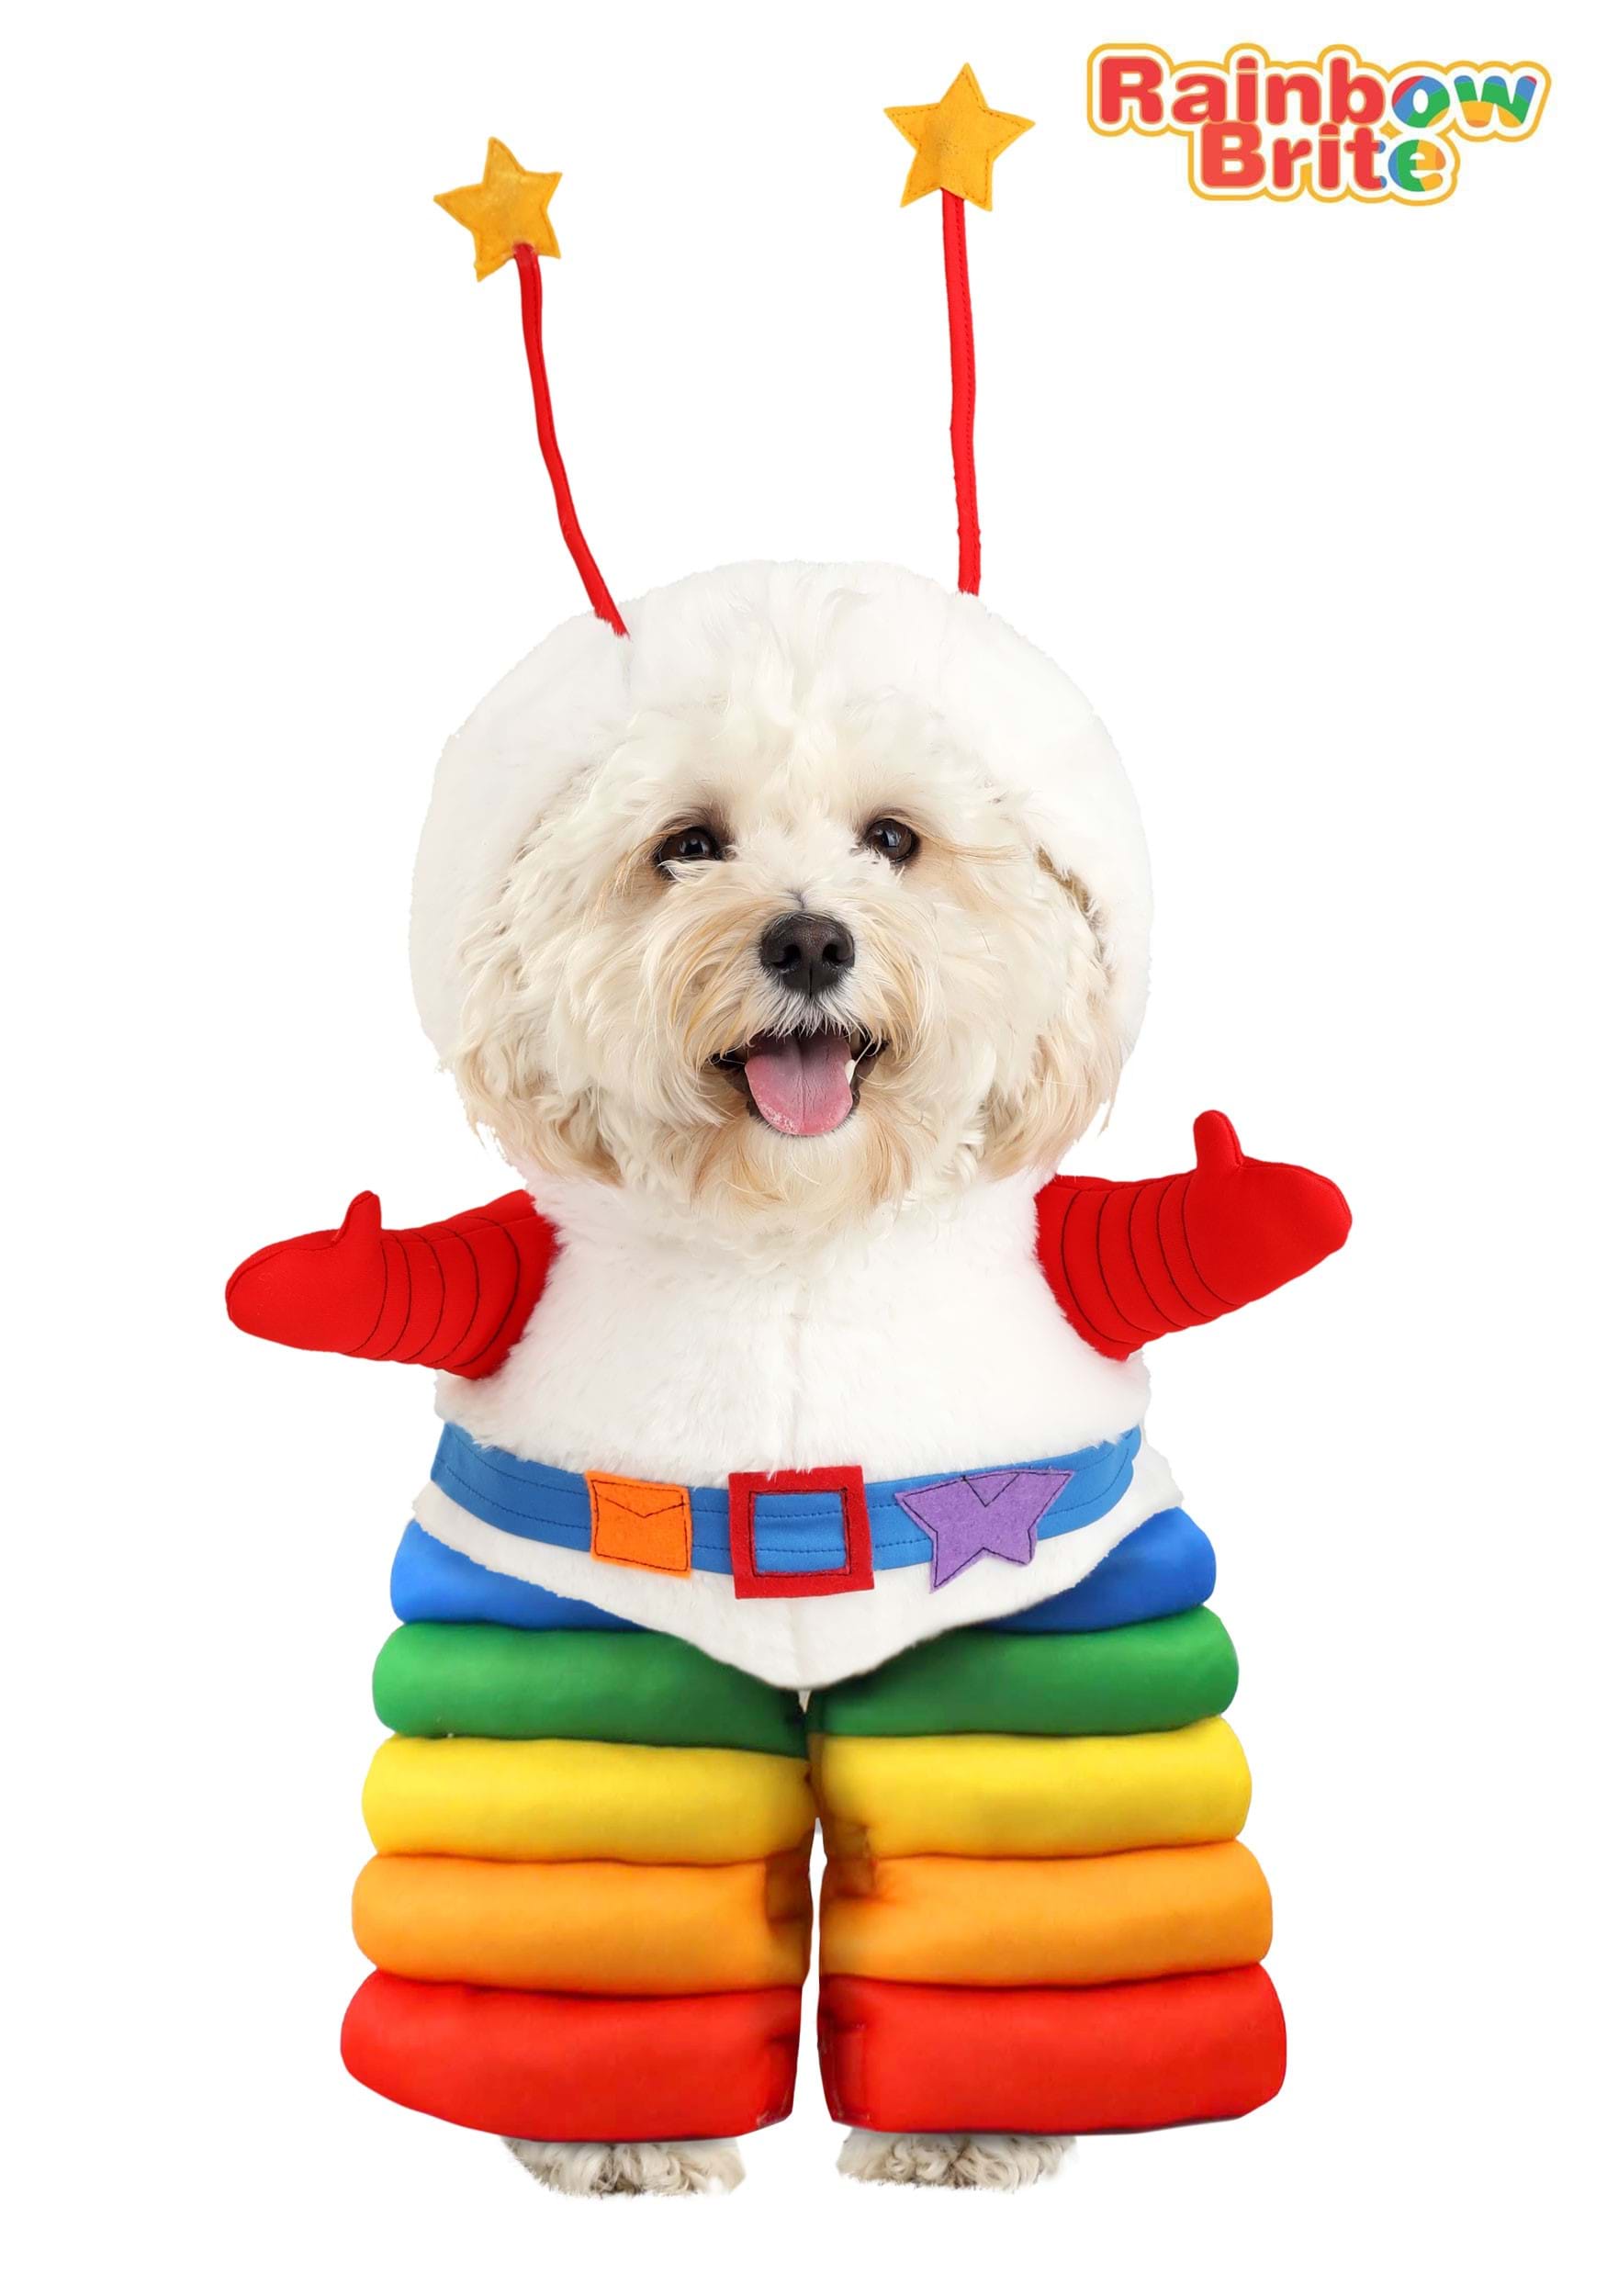 13 Halloween Costumes for Small Dogs That Are So Cute You'll Scream